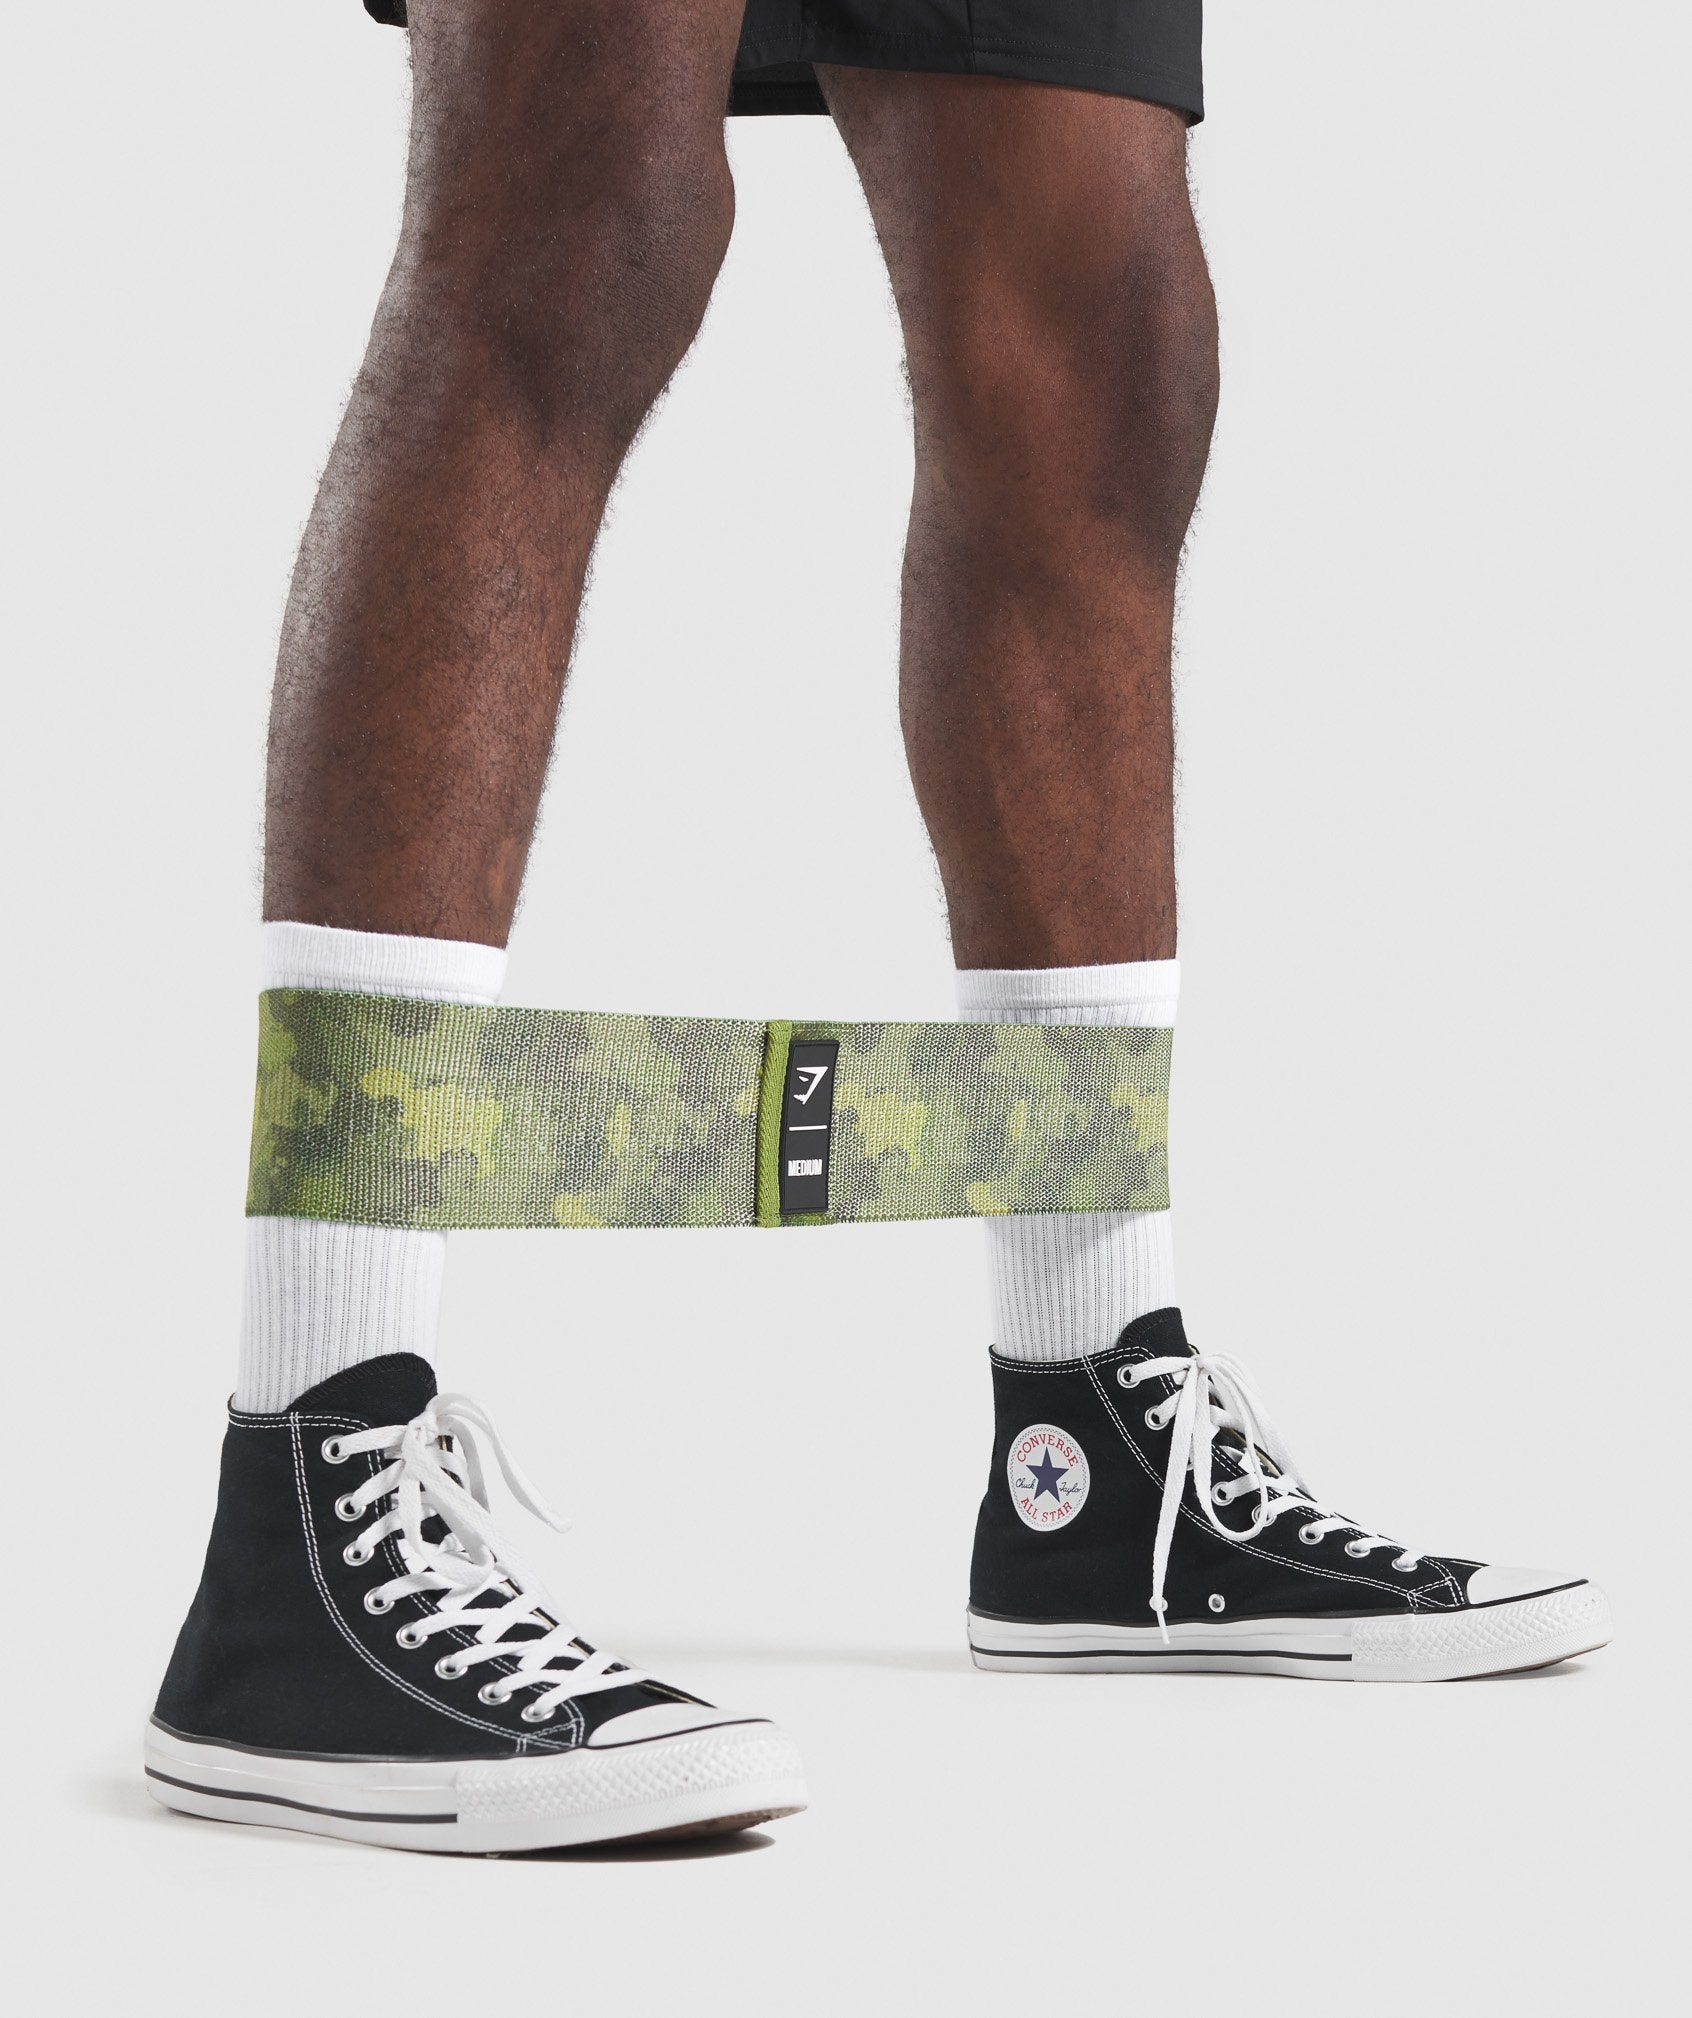 Medium Resistance Band in Camo - view 6